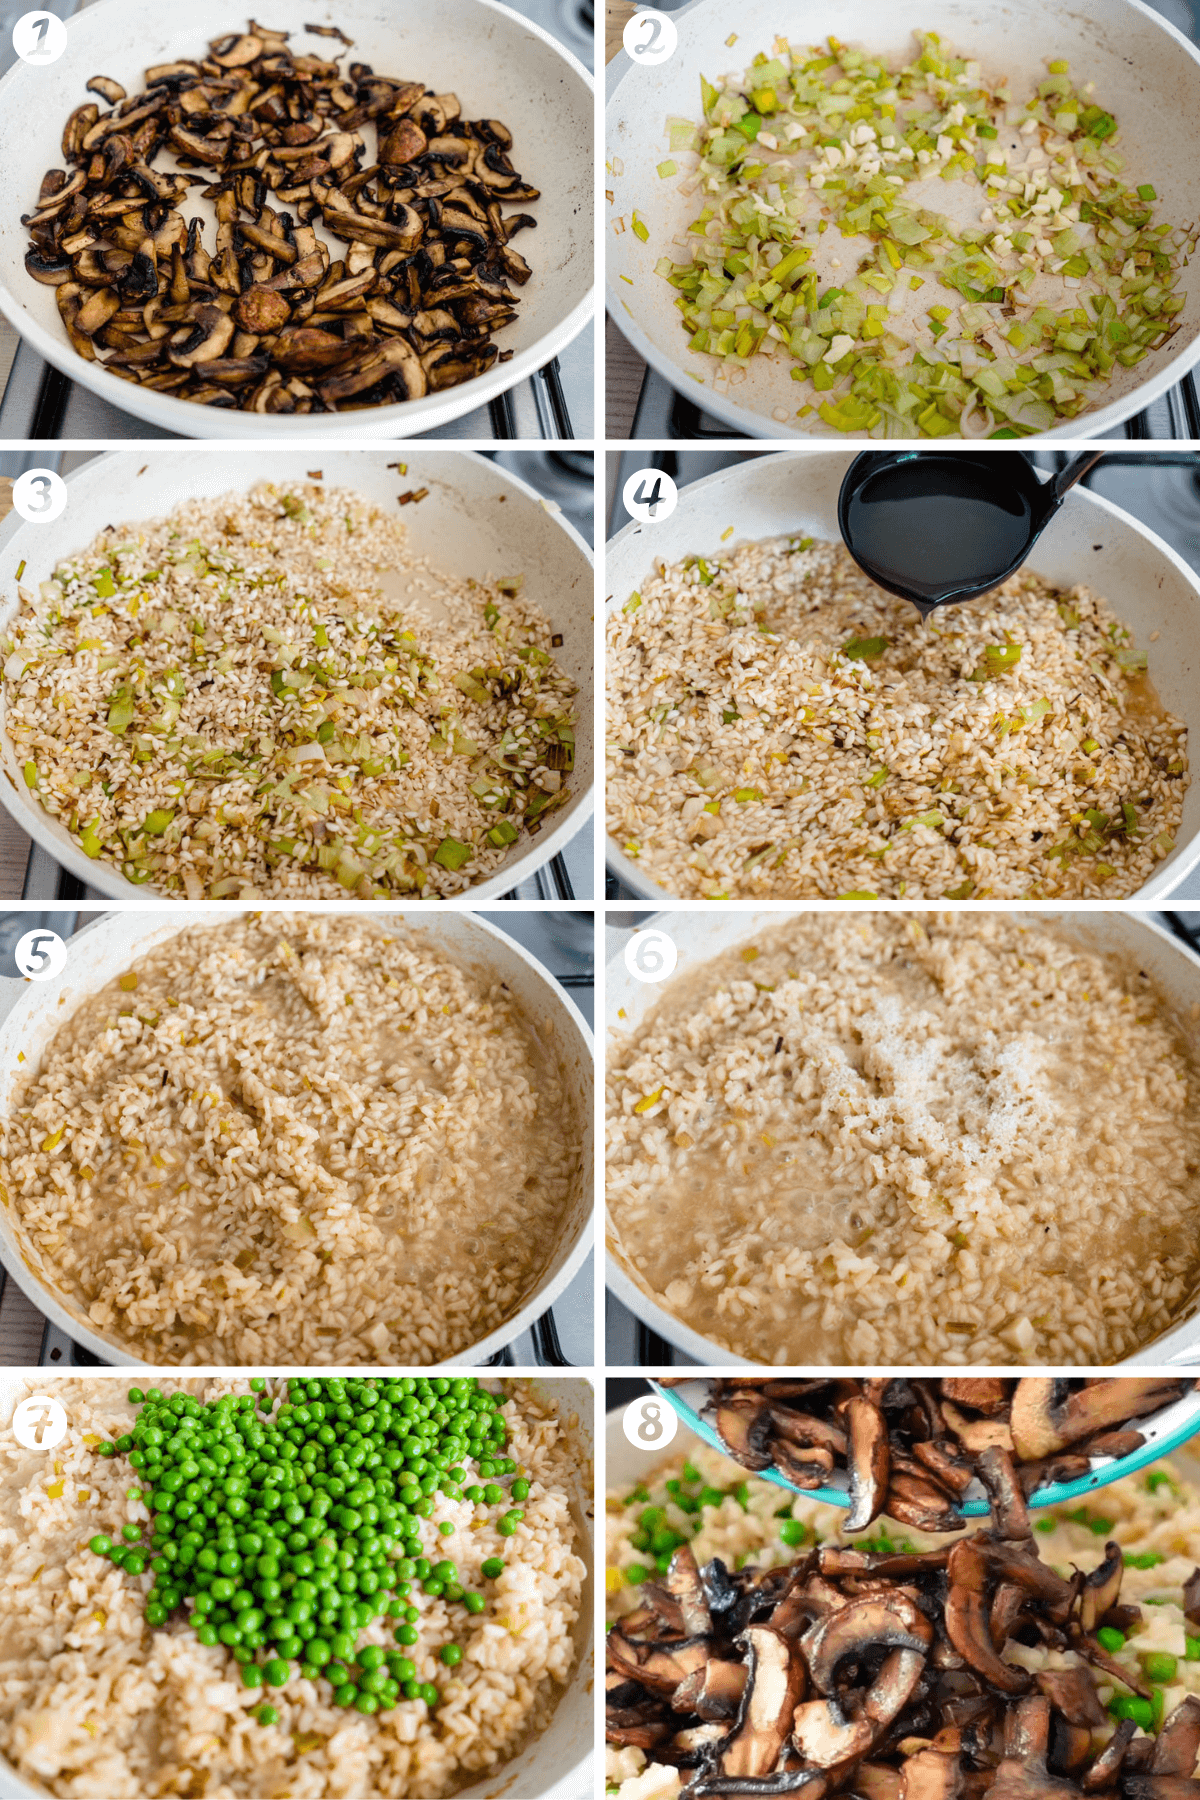 Mushroom risotto with peas how to make steps